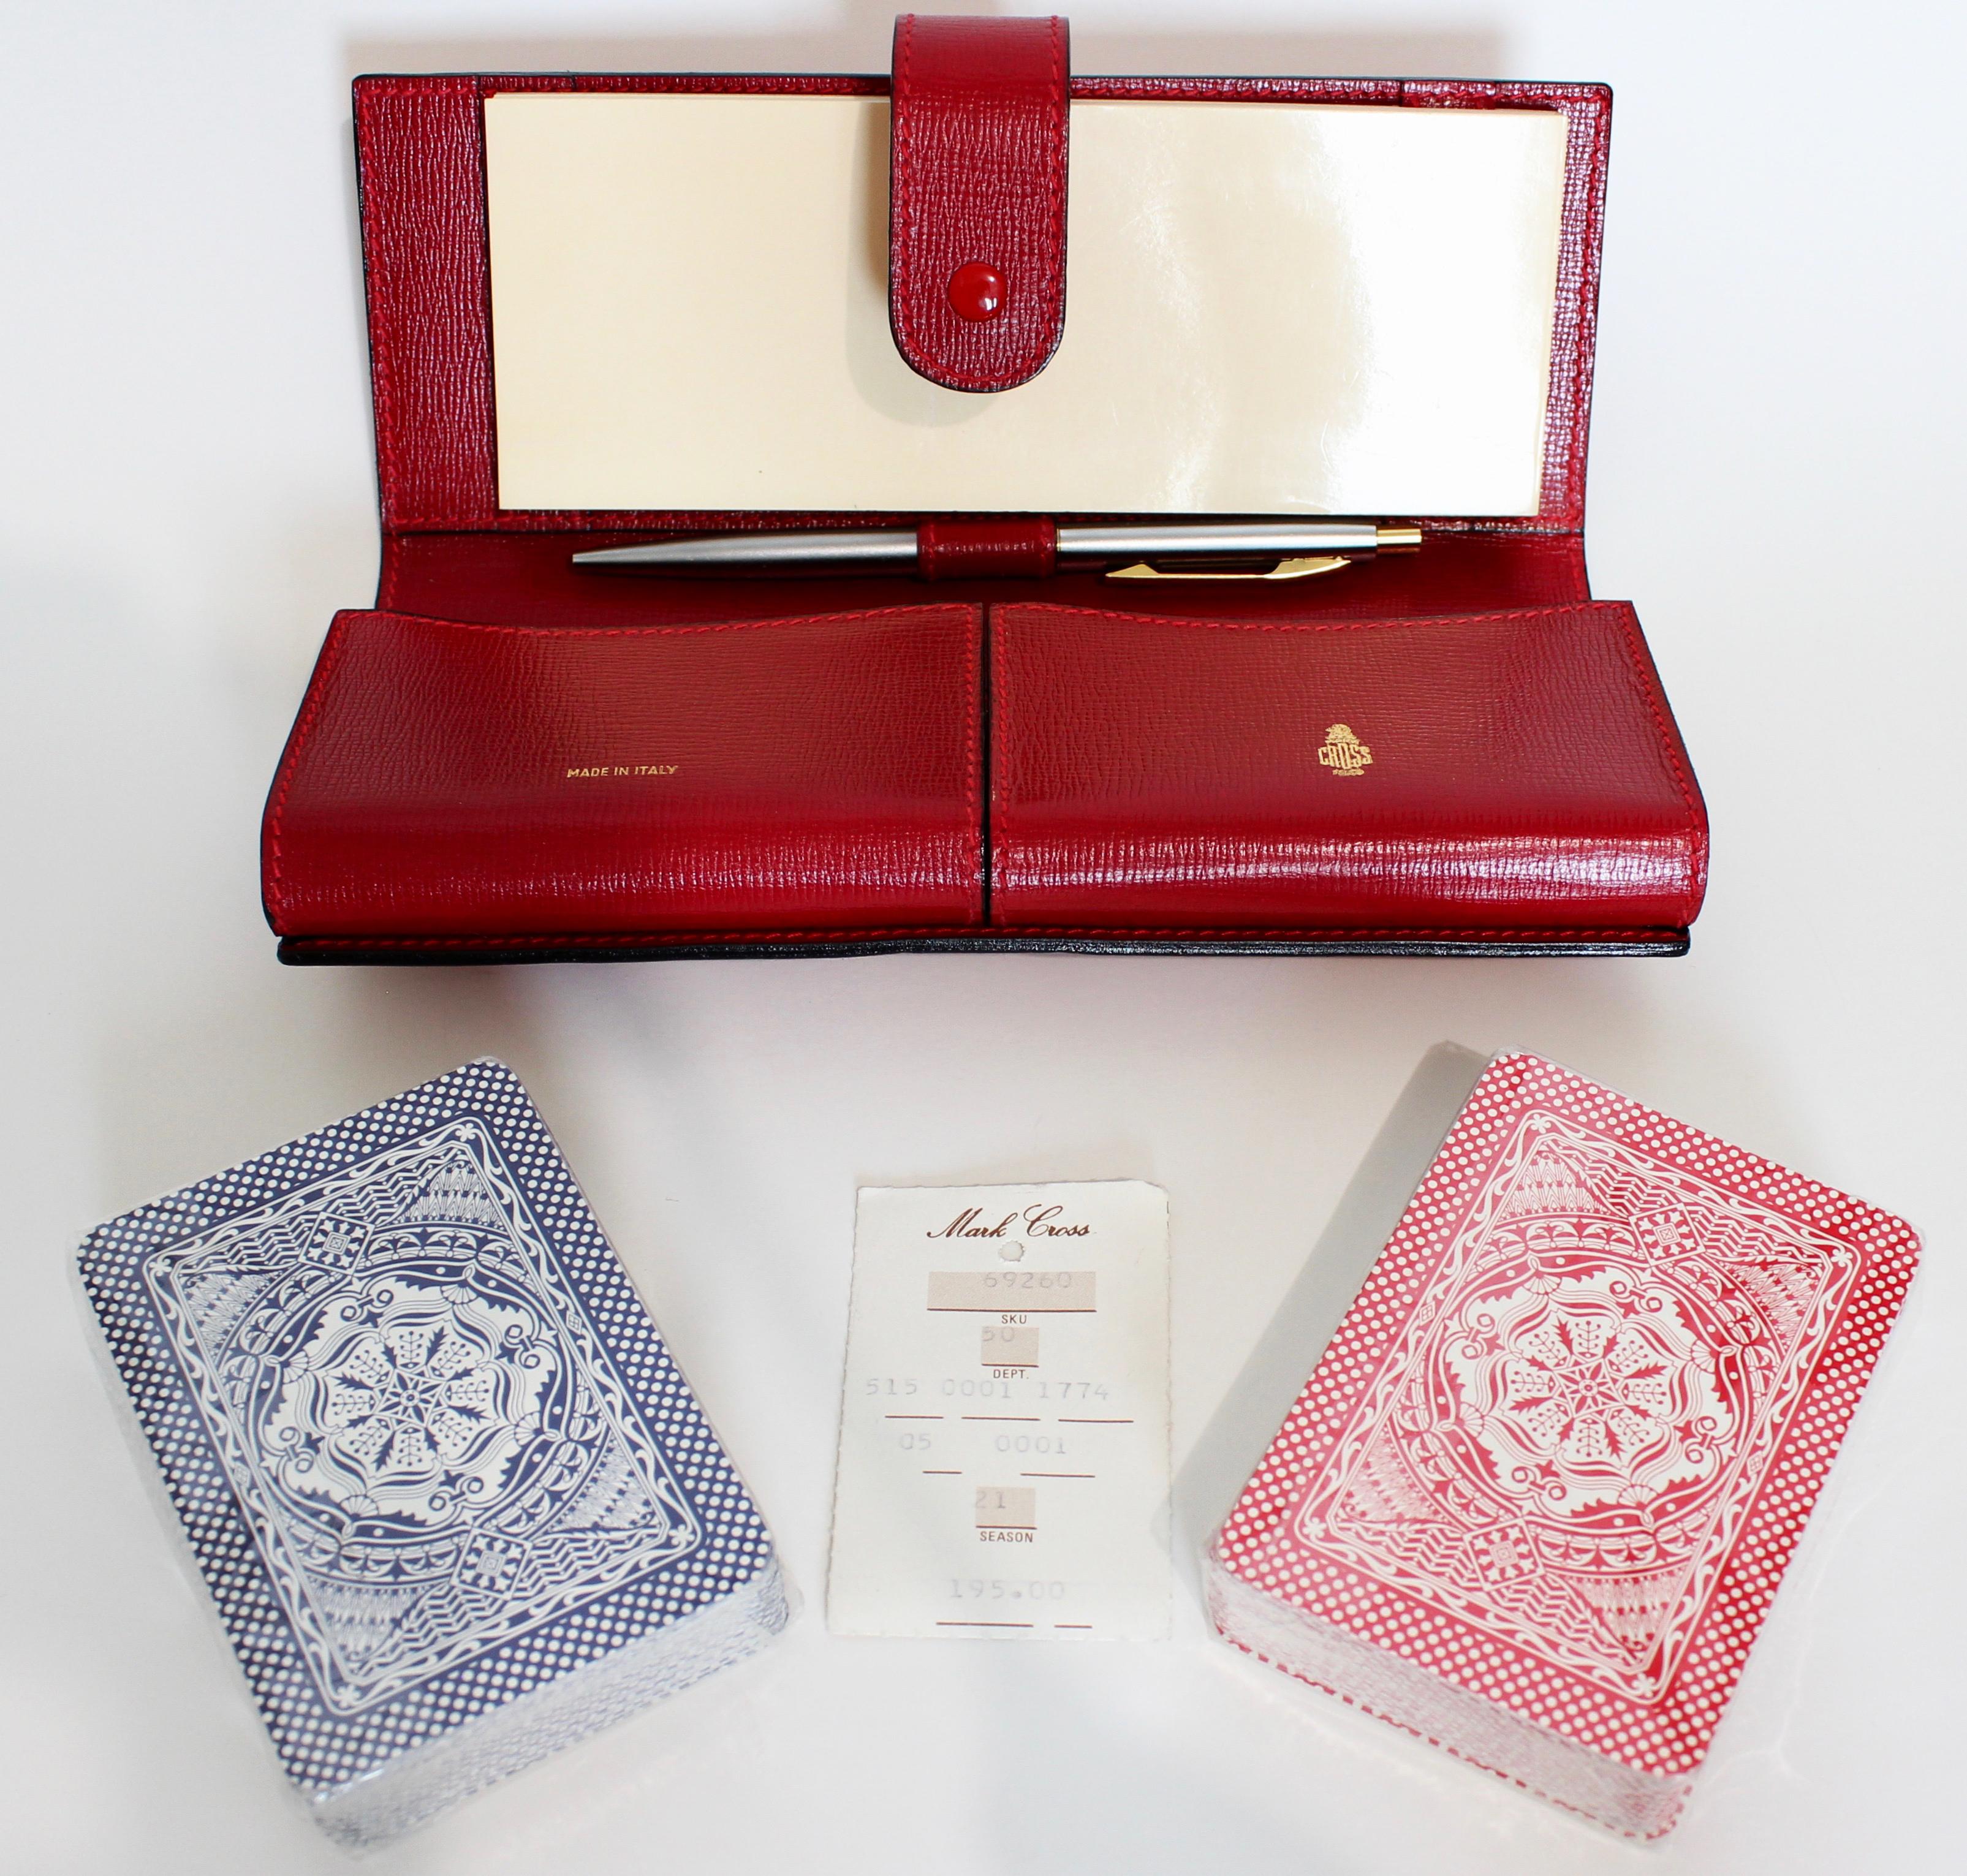 Looking for a unique gift idea? This red saffiano leather travel playing card game set fits the bill.  Made in Italy for Mark Cross, the set includes the brilliant red leather game case, two decks of playing cards (still factory wrapped), a pen and